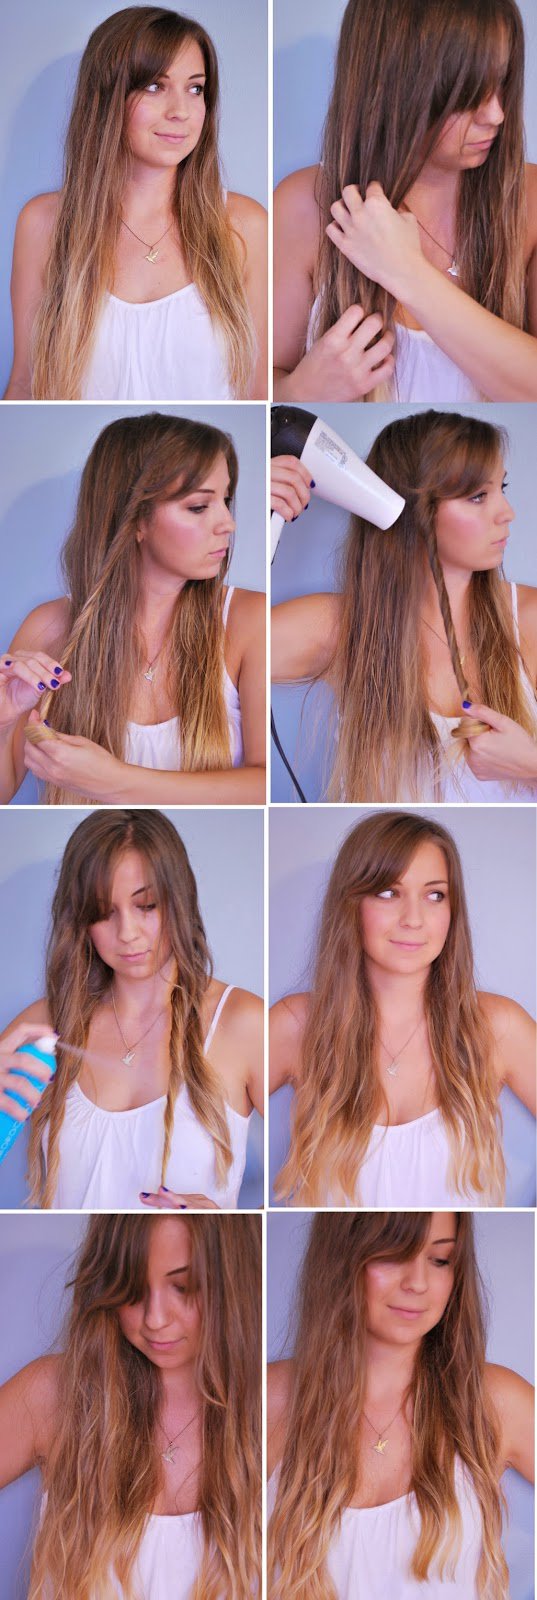 11 Simple and Very Useful Hairstyle Tips That You Need To Know